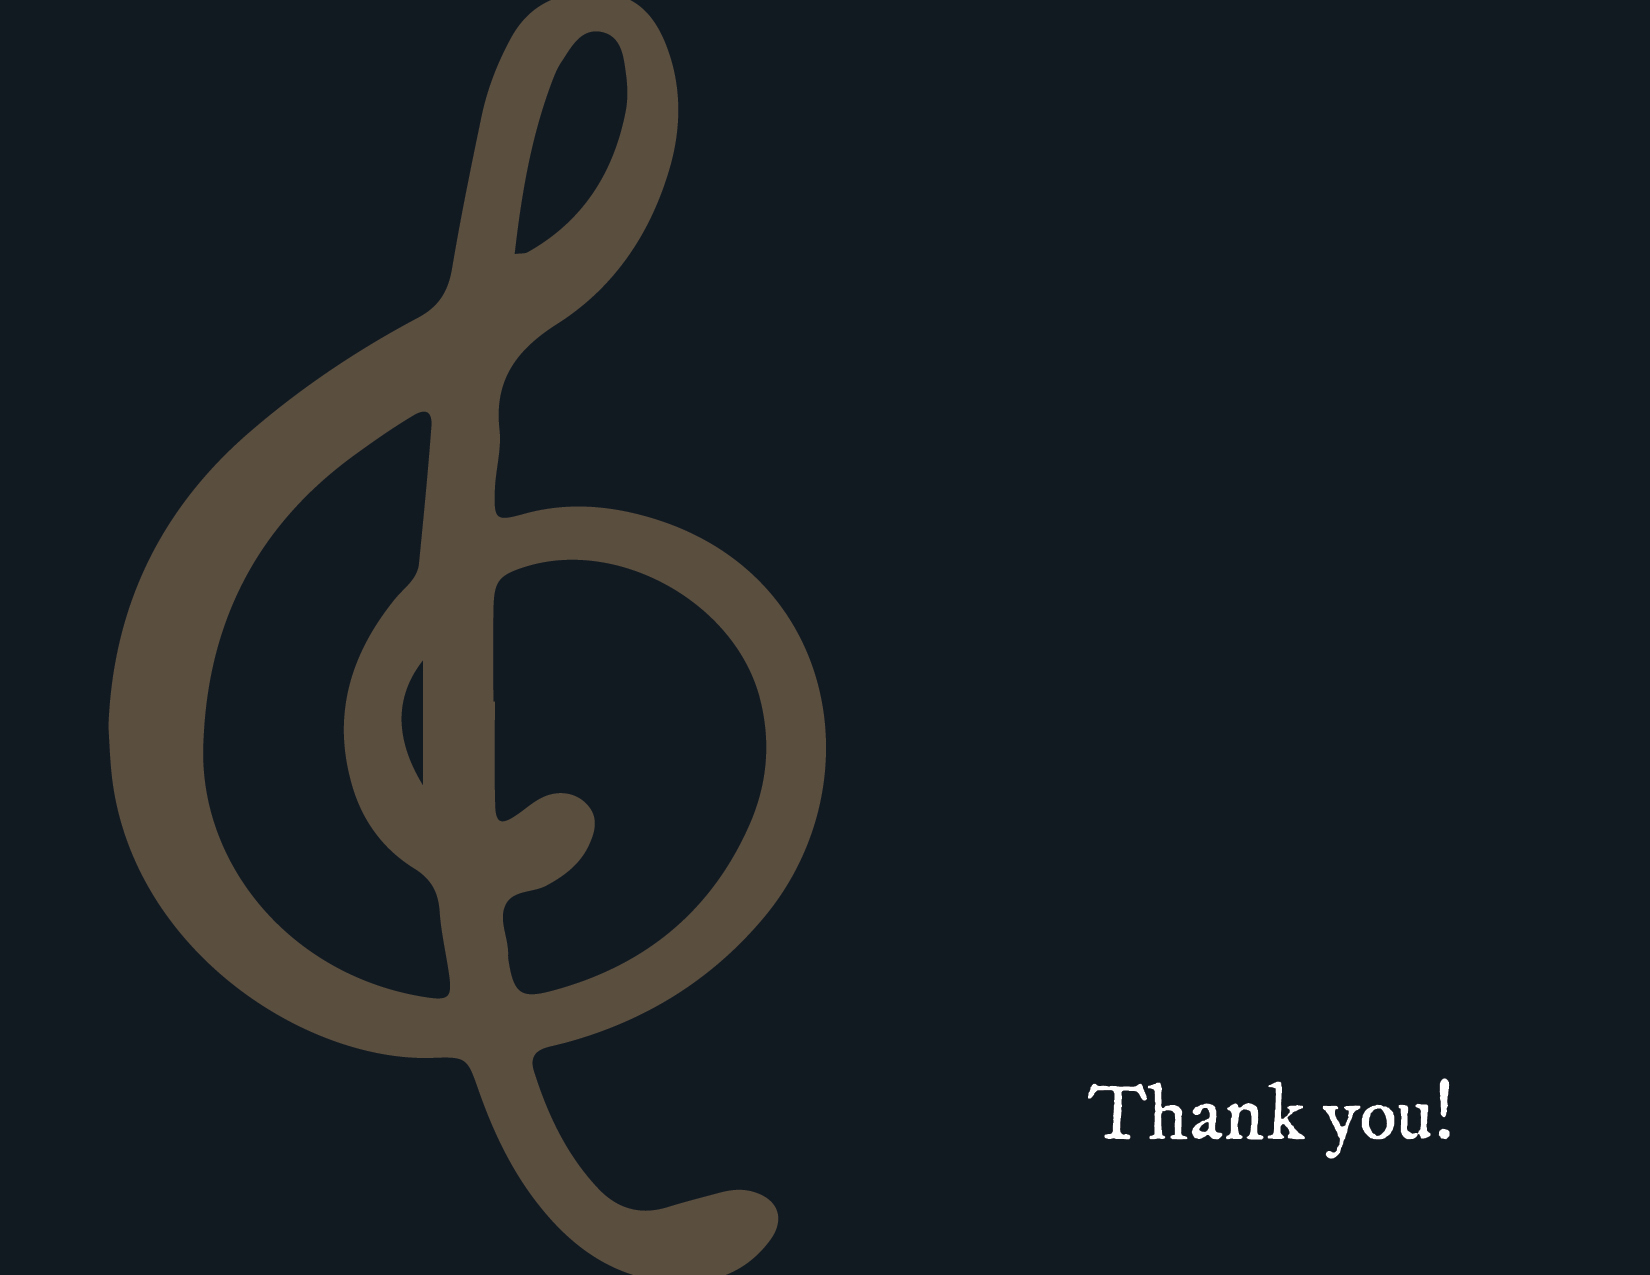 This is an image of a musical treble clef with text